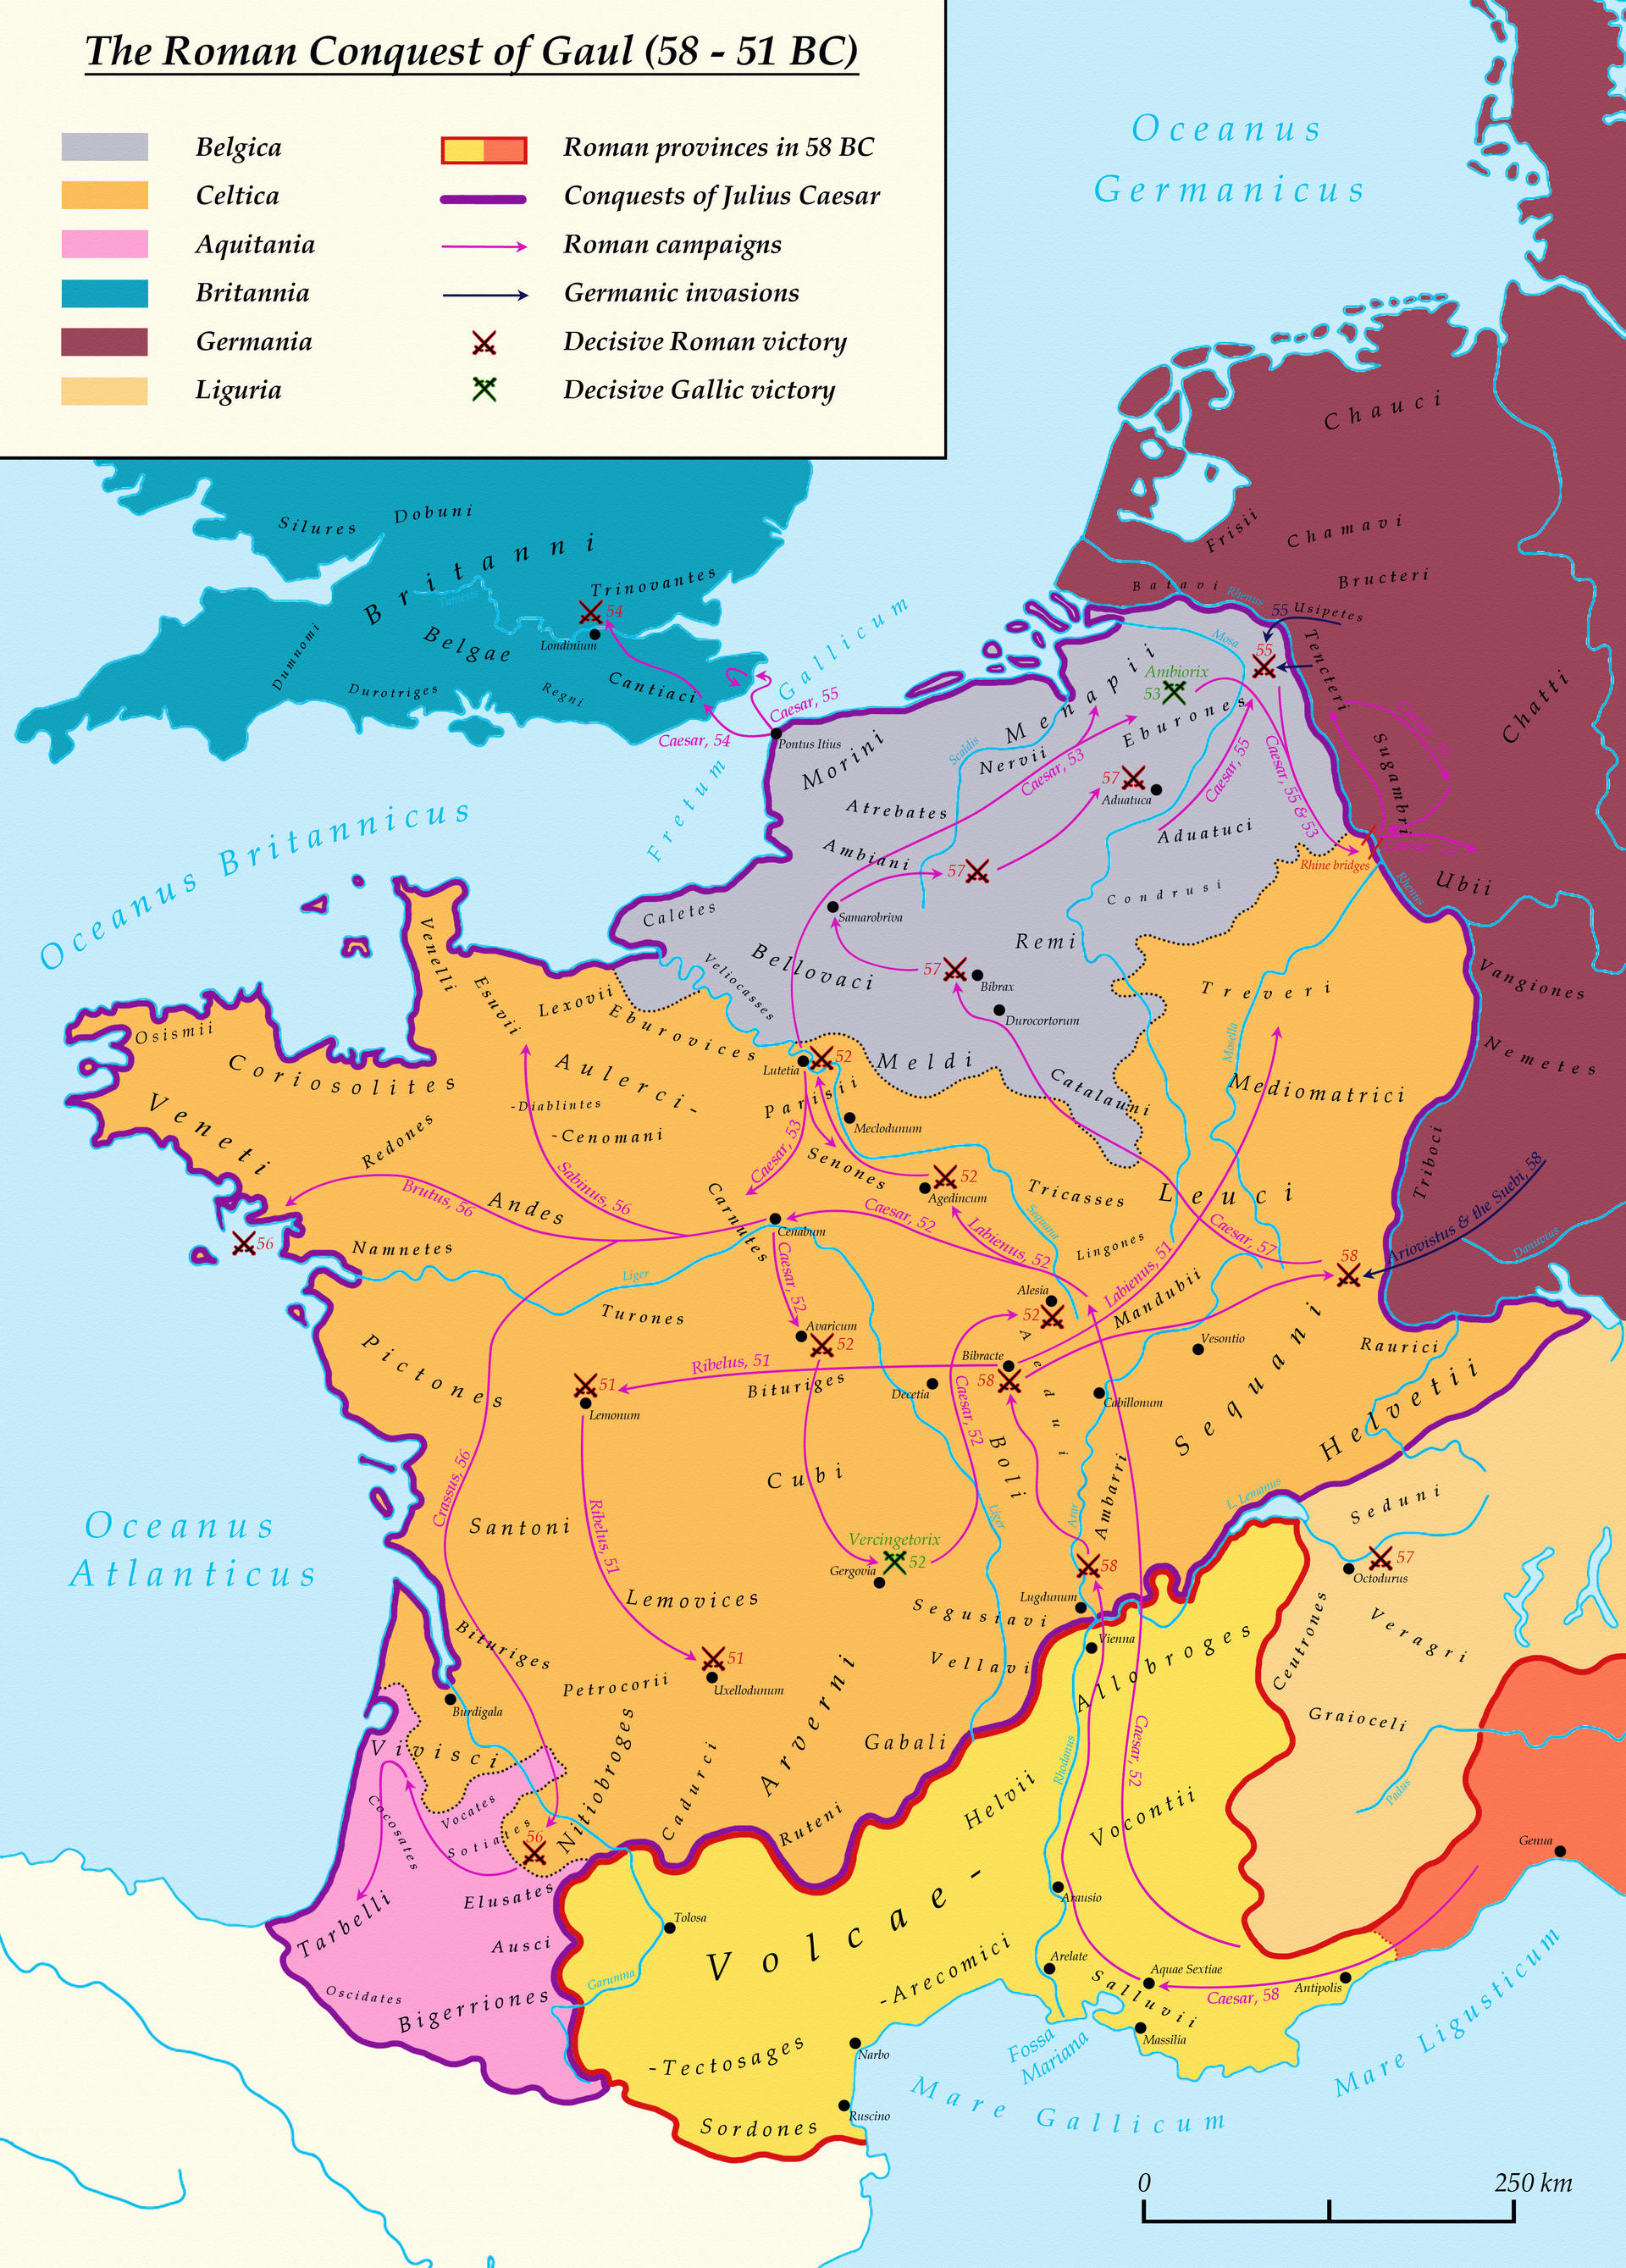 The Roman Conquest of Gaul (58 - 51 BC)